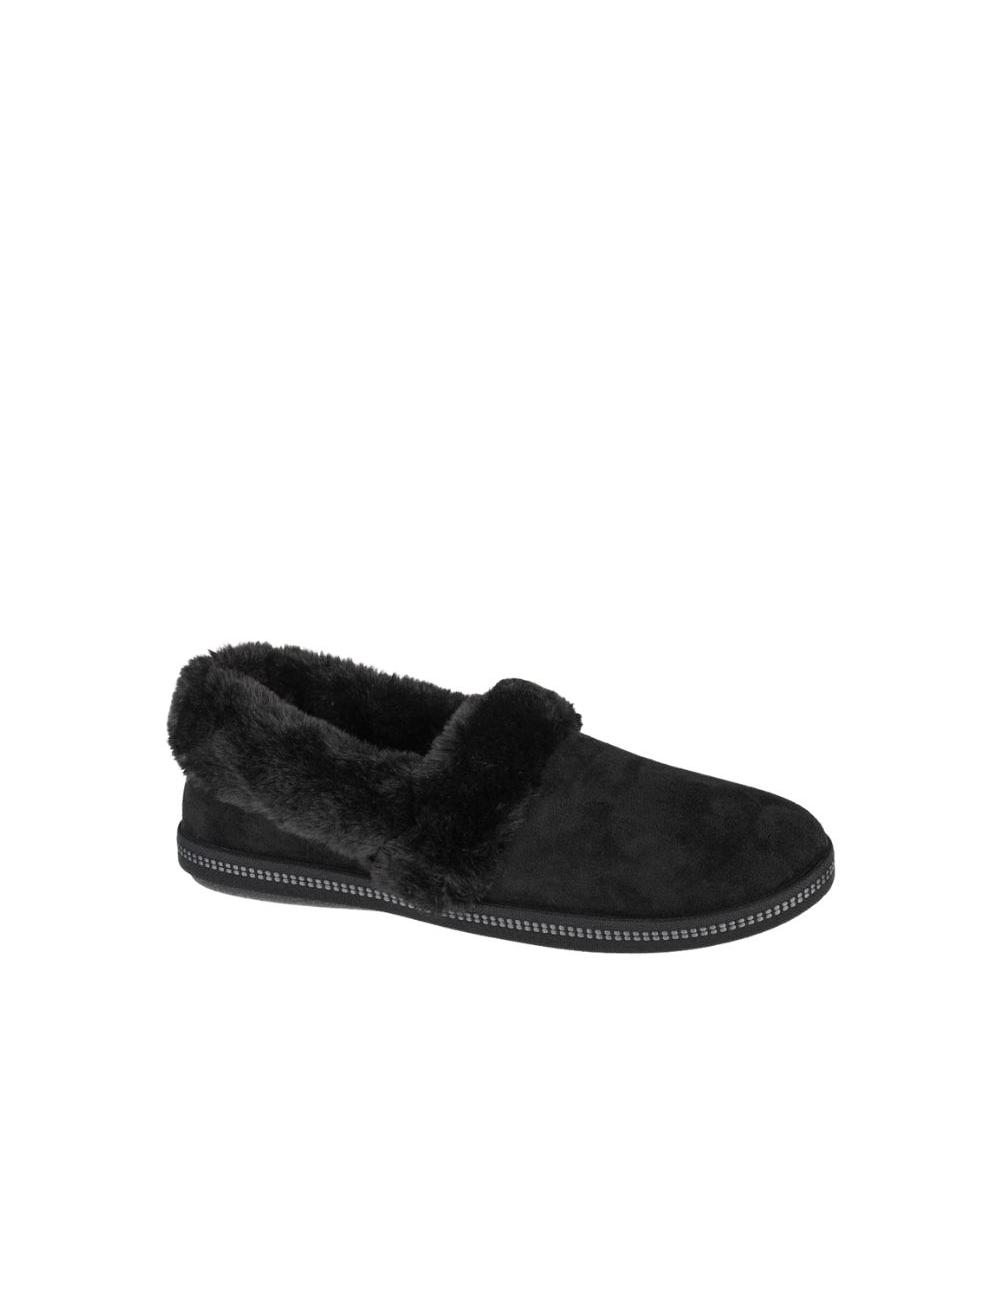 SKECHERS COZY CAMPFIER-TEAM TOASTY MUJER